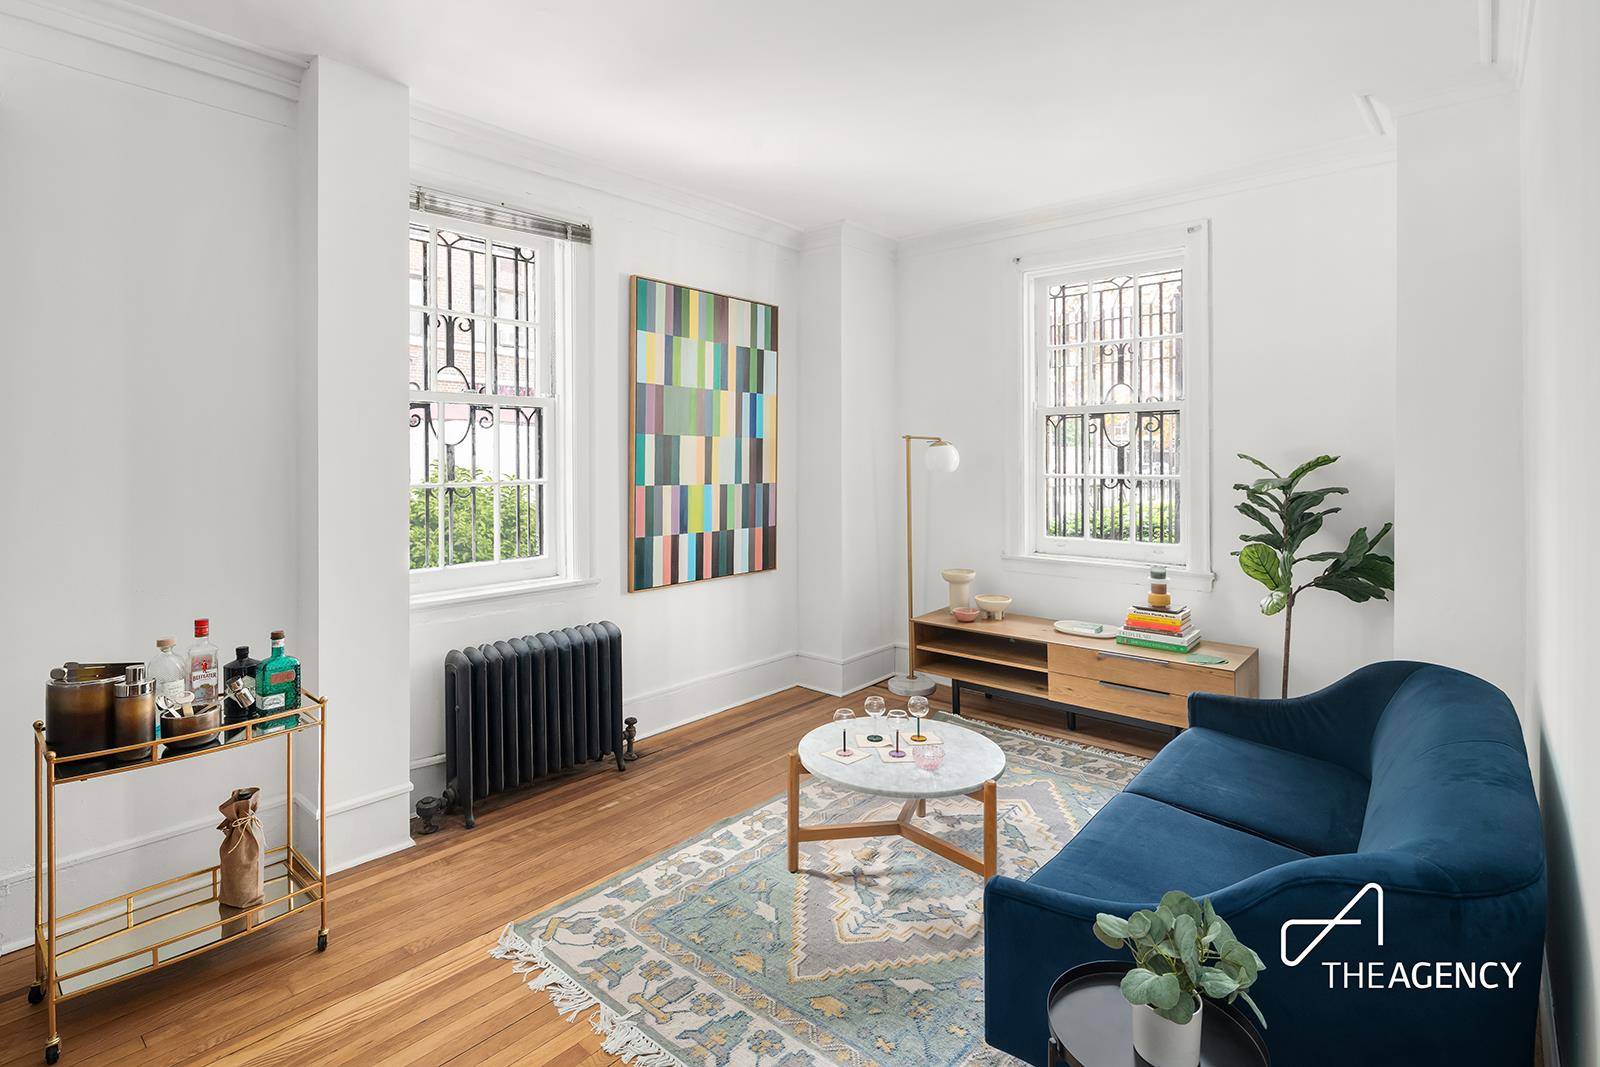 A rare opportunity to live in one of Greenwich village's most iconic buildings.